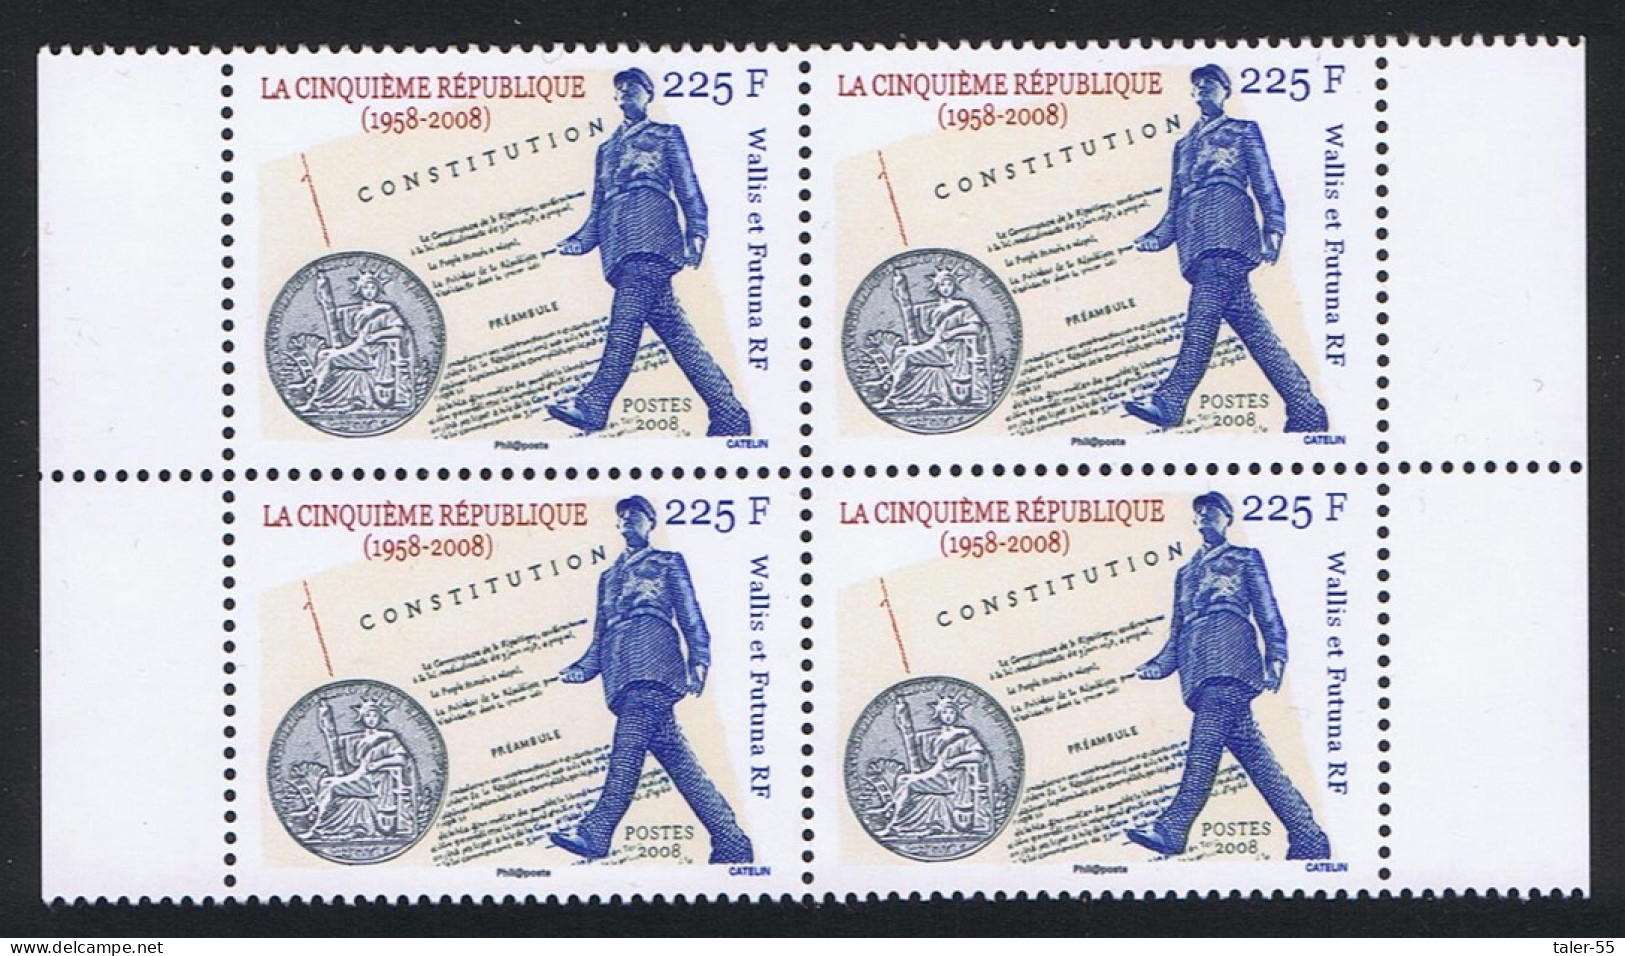 Wallis And Futuna General De Gaulle And Constitution Block Of 4 2008 MNH SG#951 - Nuevos